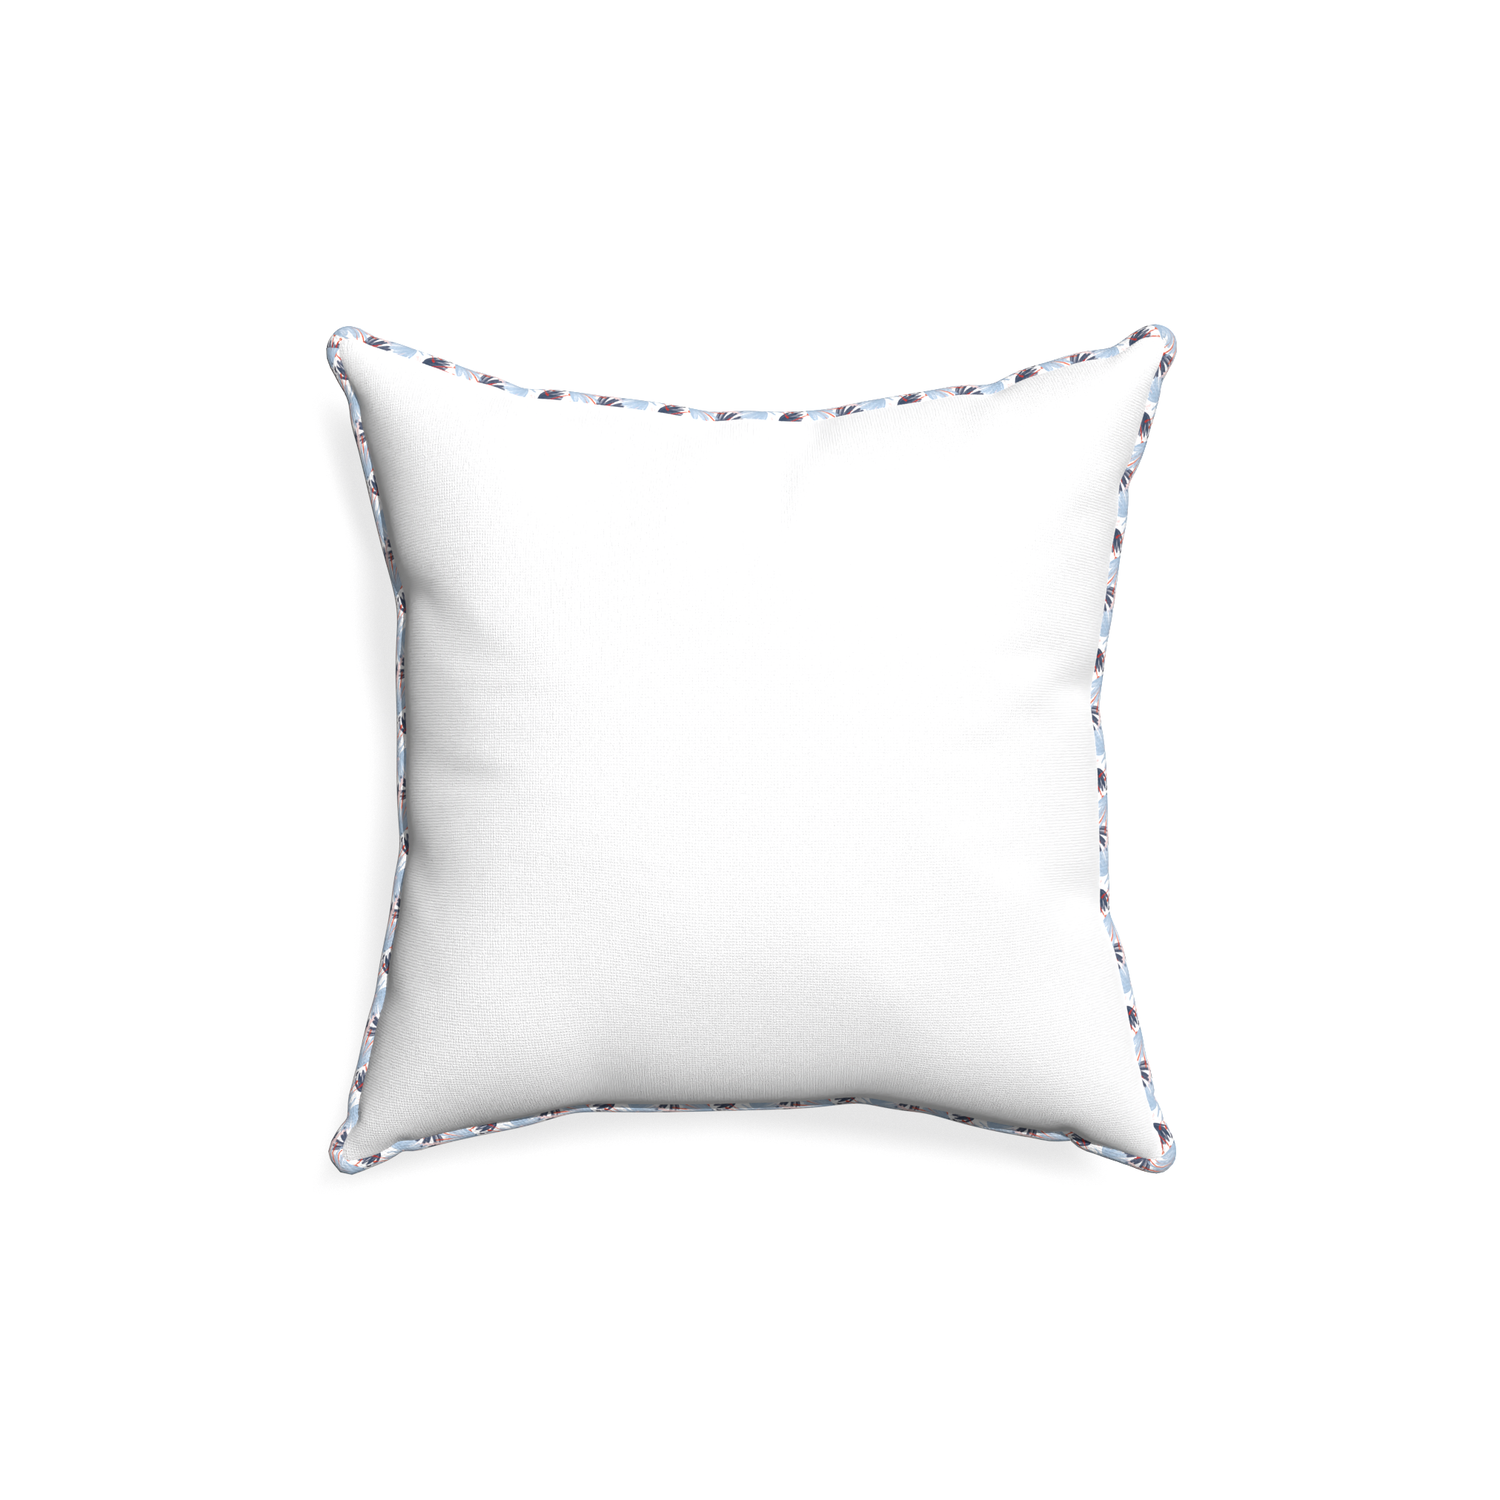 18-square snow custom pillow with e piping on white background